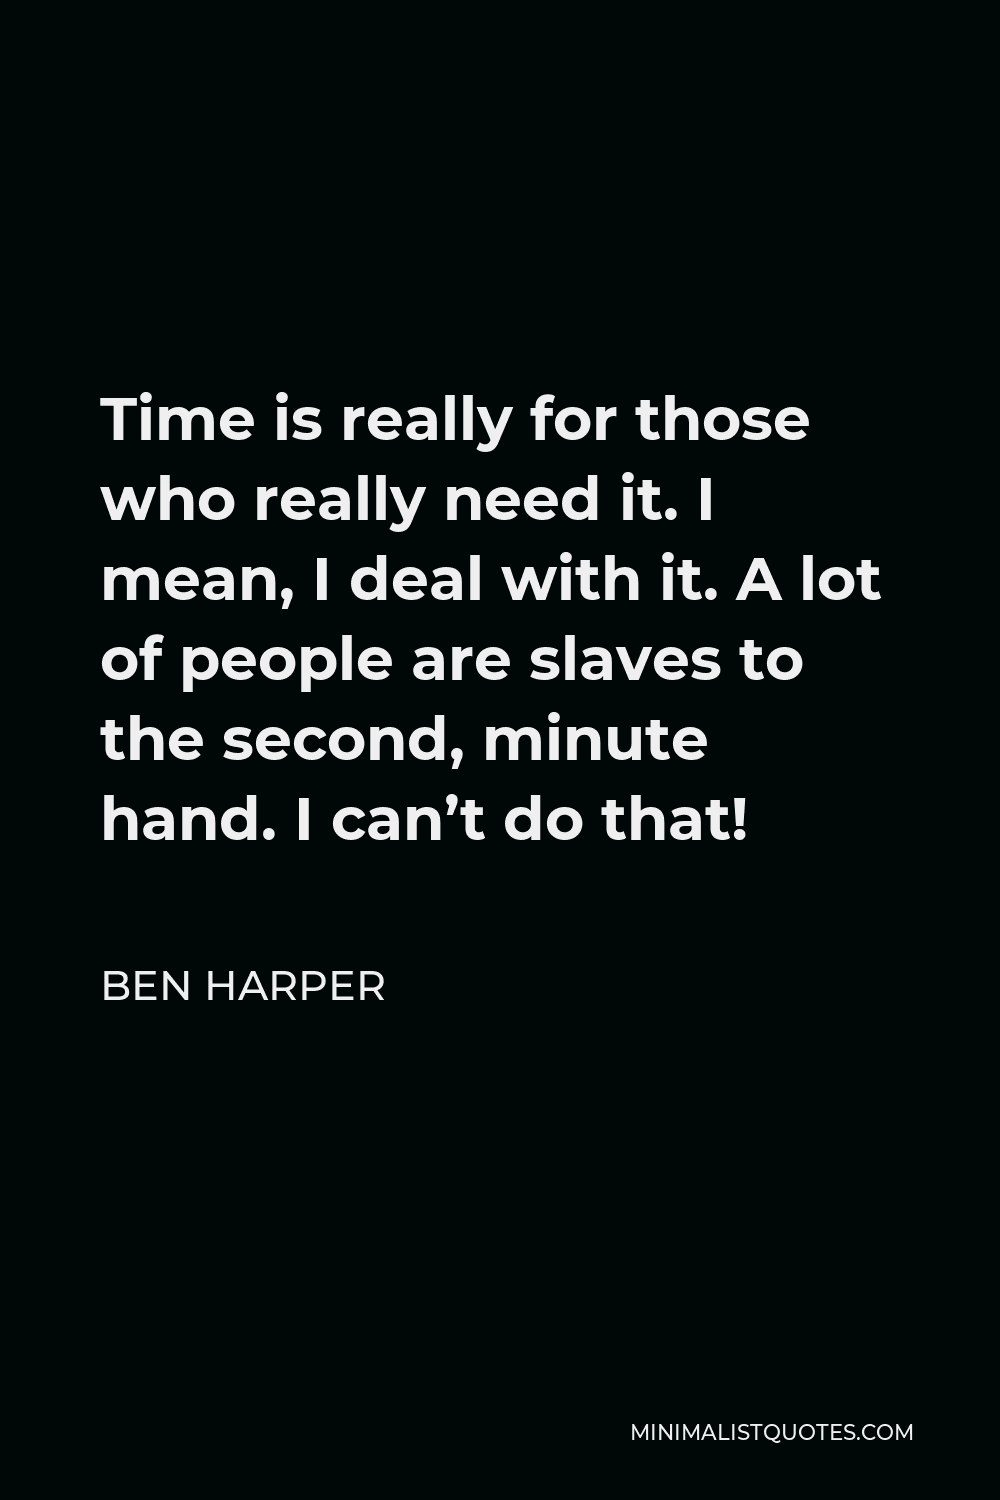 Ben Harper Quote - Time is really for those who really need it. I mean, I deal with it. A lot of people are slaves to the second, minute hand. I can’t do that!